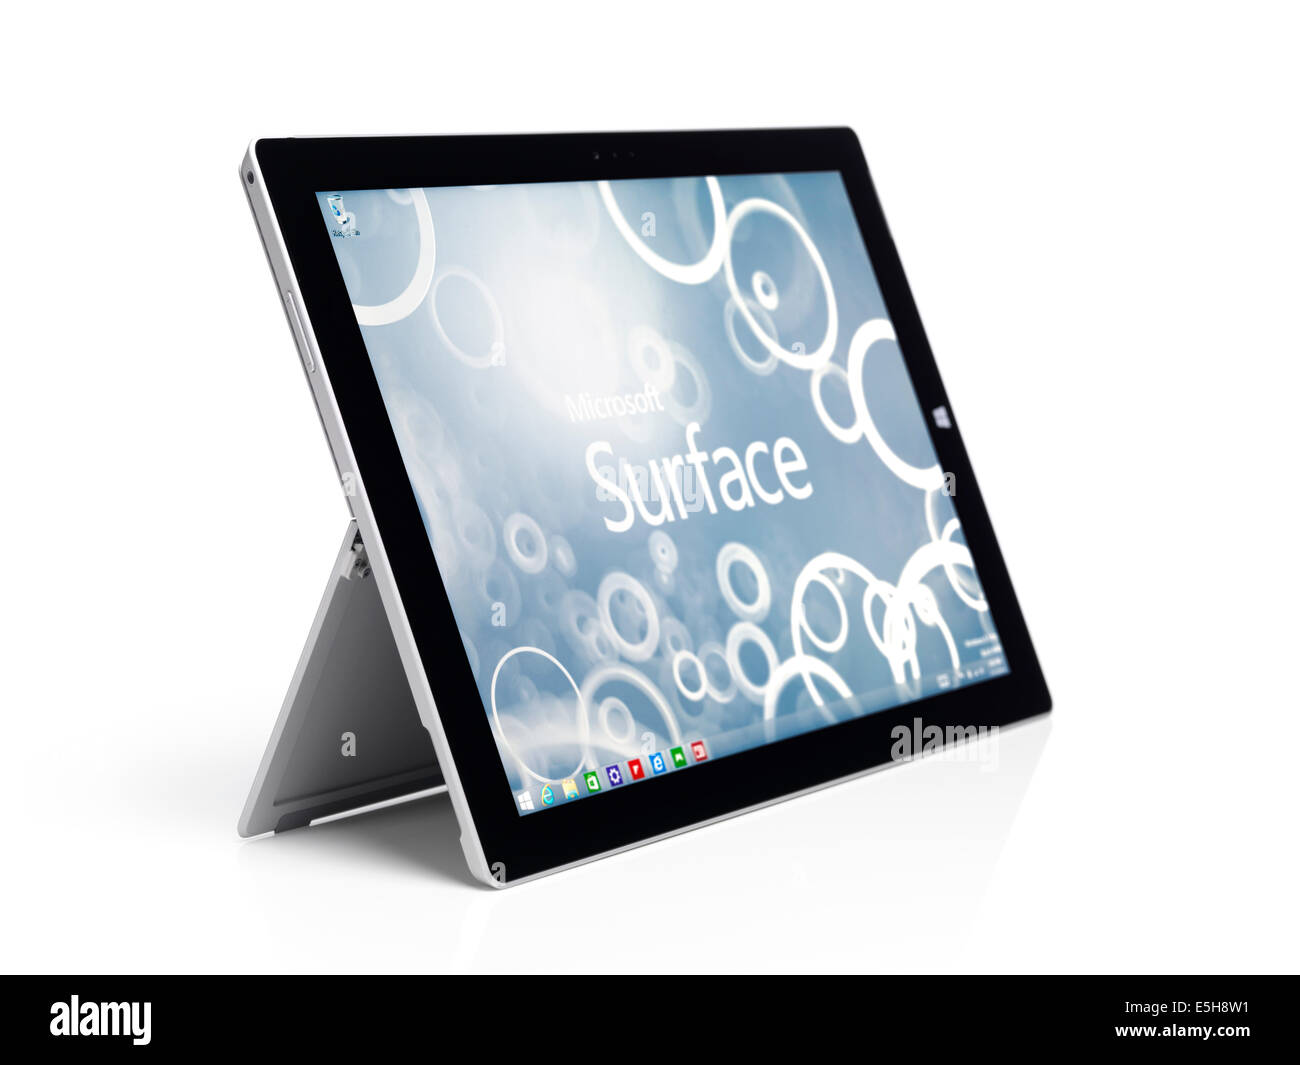 Microsoft Surface Pro 3 tablet computer with Windows 8 desktop on display isolated on white background Stock Photo